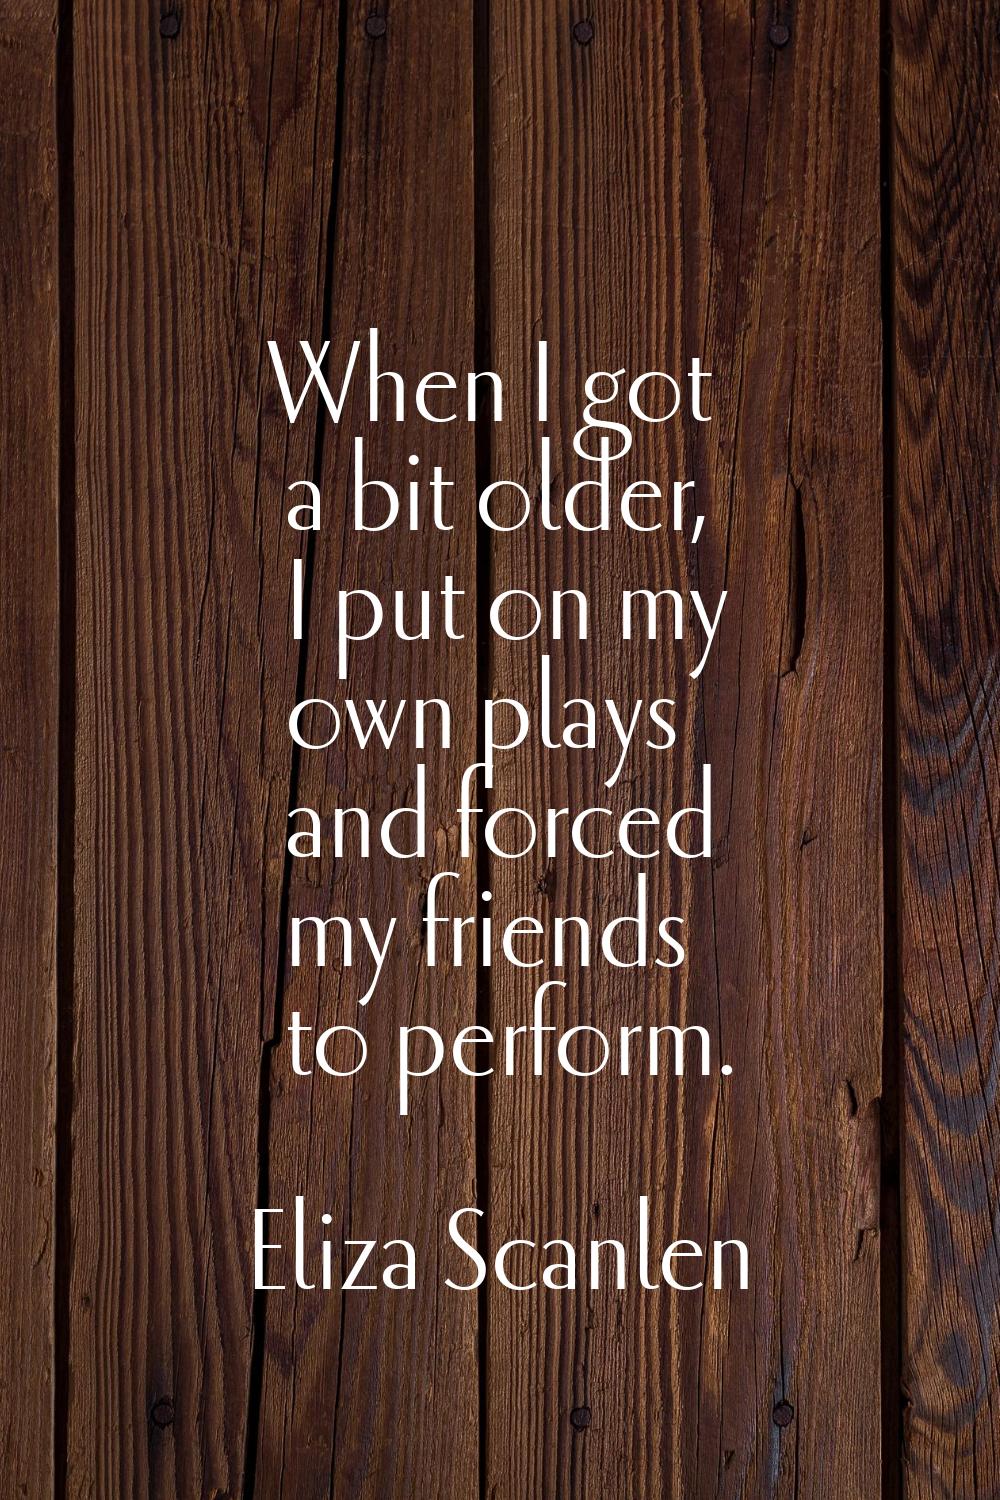 When I got a bit older, I put on my own plays and forced my friends to perform.